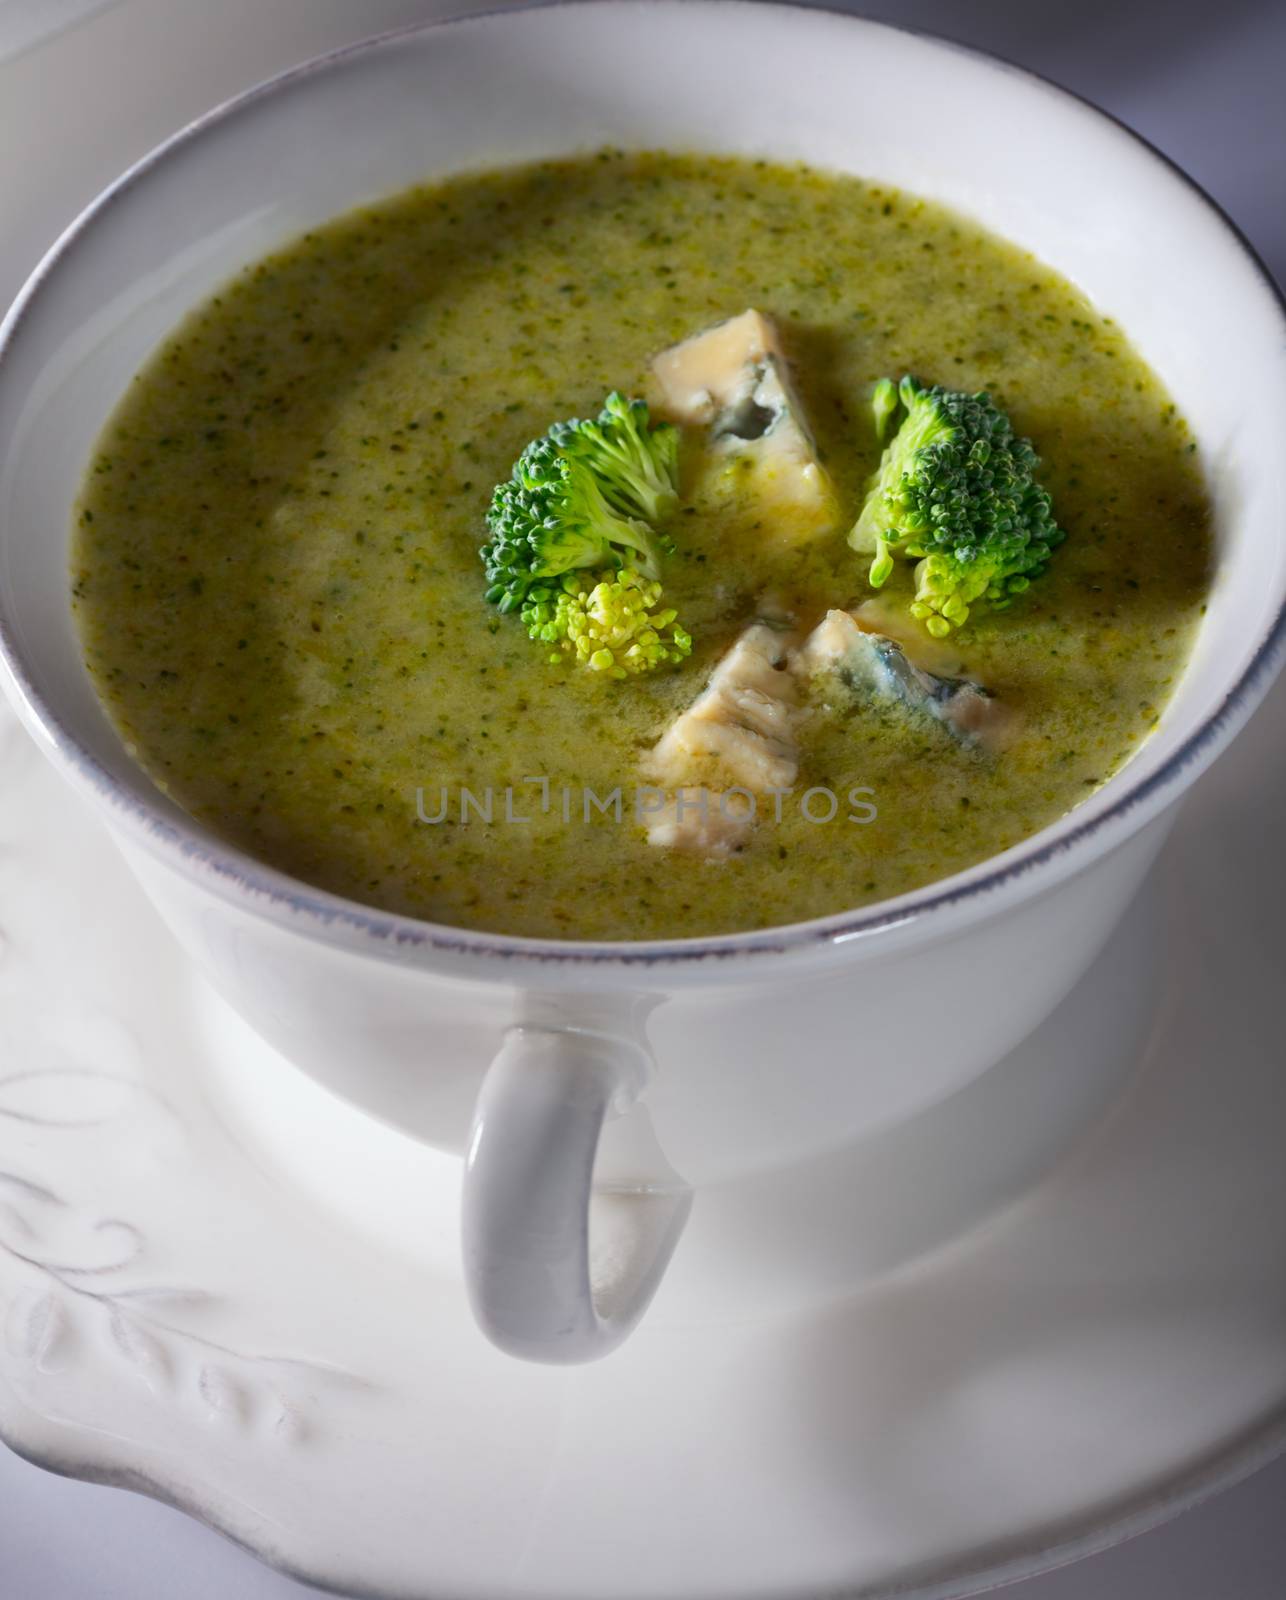 A bowl of creamy broccoli soup with blue cheese